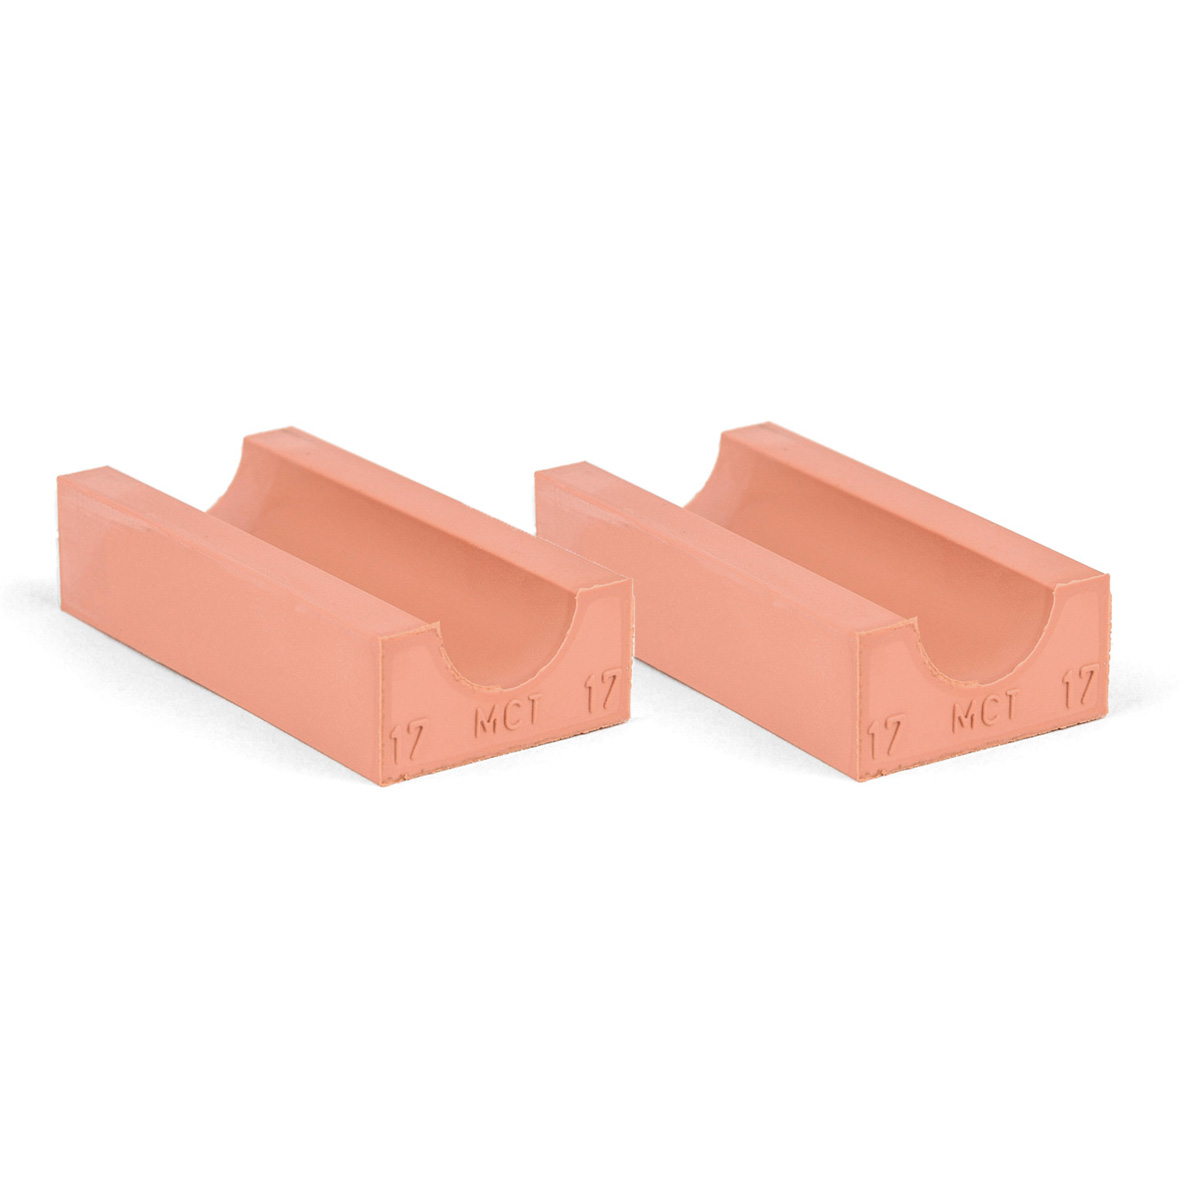 30-17*2 Set of 2 half insert block lycron, 30-17 for cable/pipe diam. 16.5-17.5mm